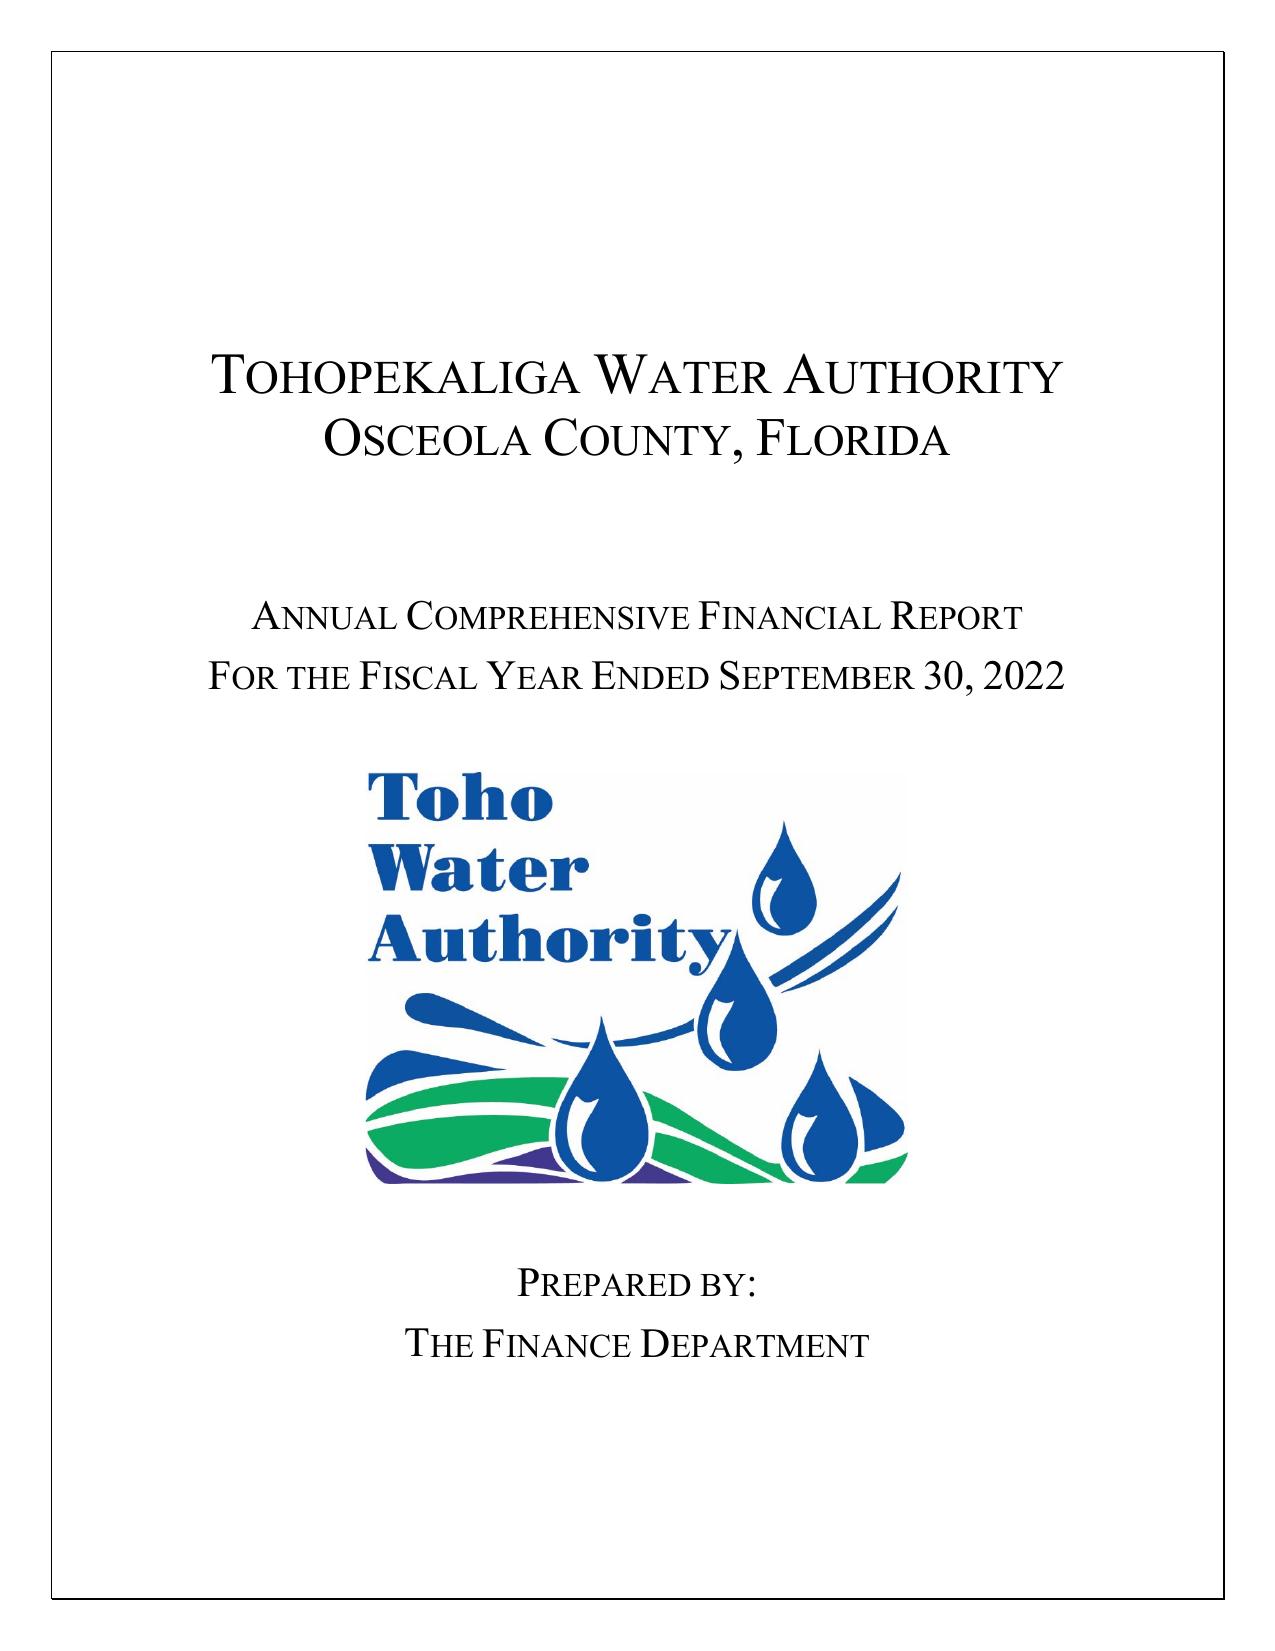 TOHOWATER 2023 Annual Report